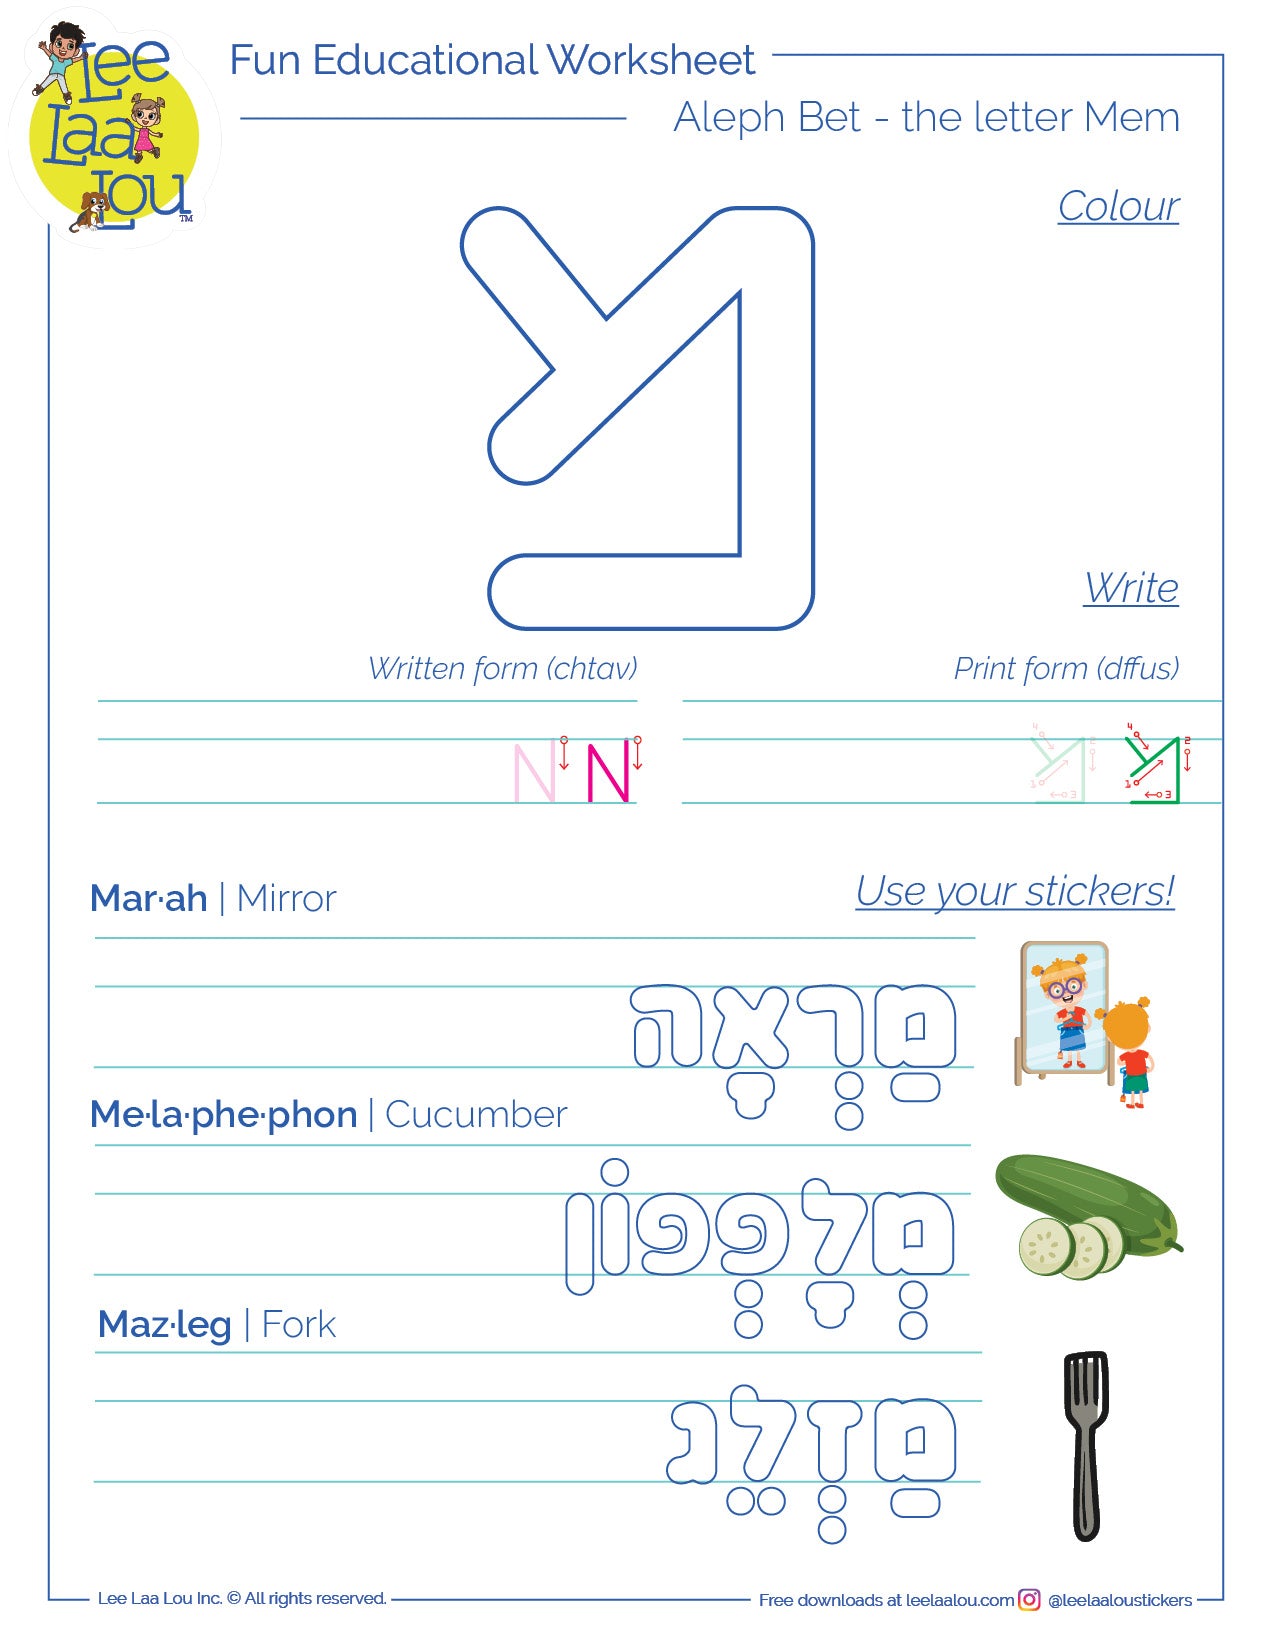 The 13th letter of the Hebrew alphabet - mem - activity sheet - האות מם דף עבודה